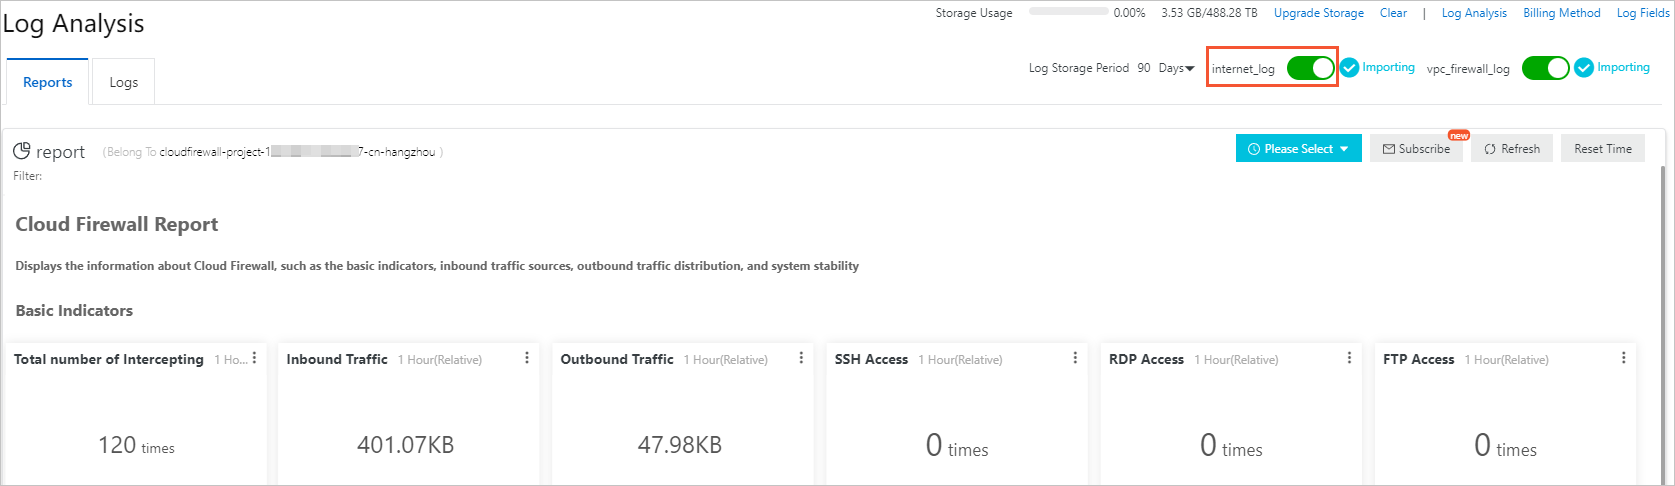 Enable log collection for Internet traffic